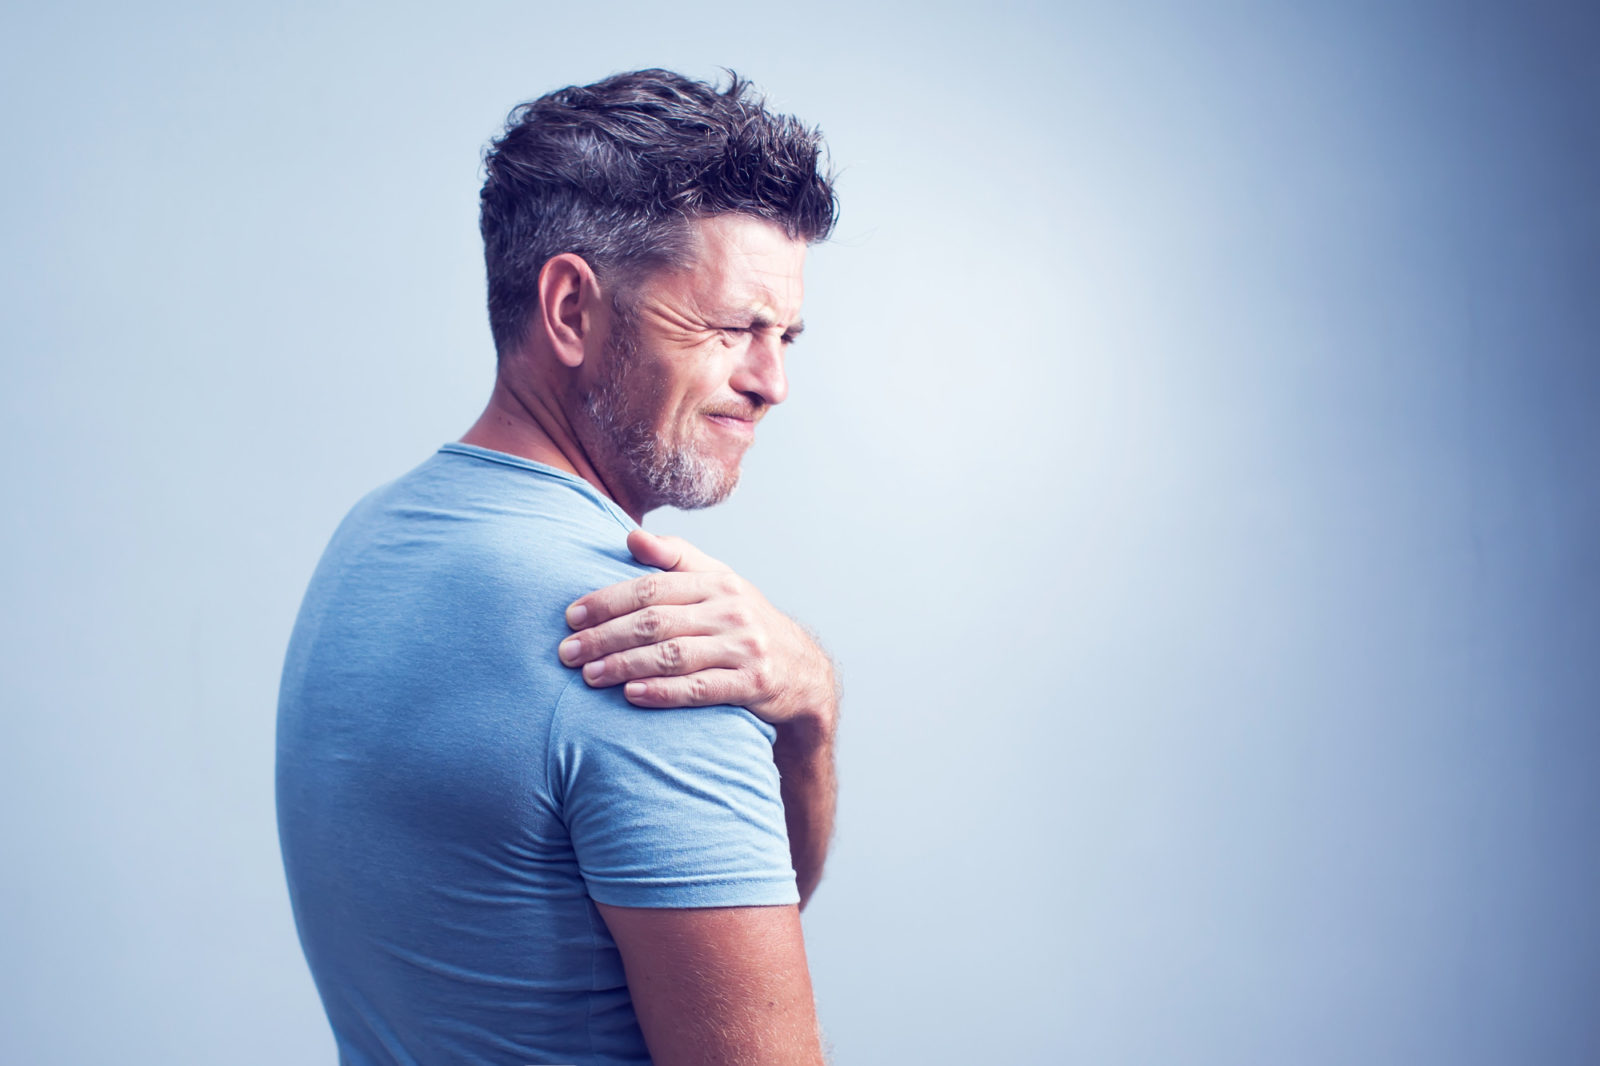 What Causes Pain In The Upper Arm And Shoulder Area